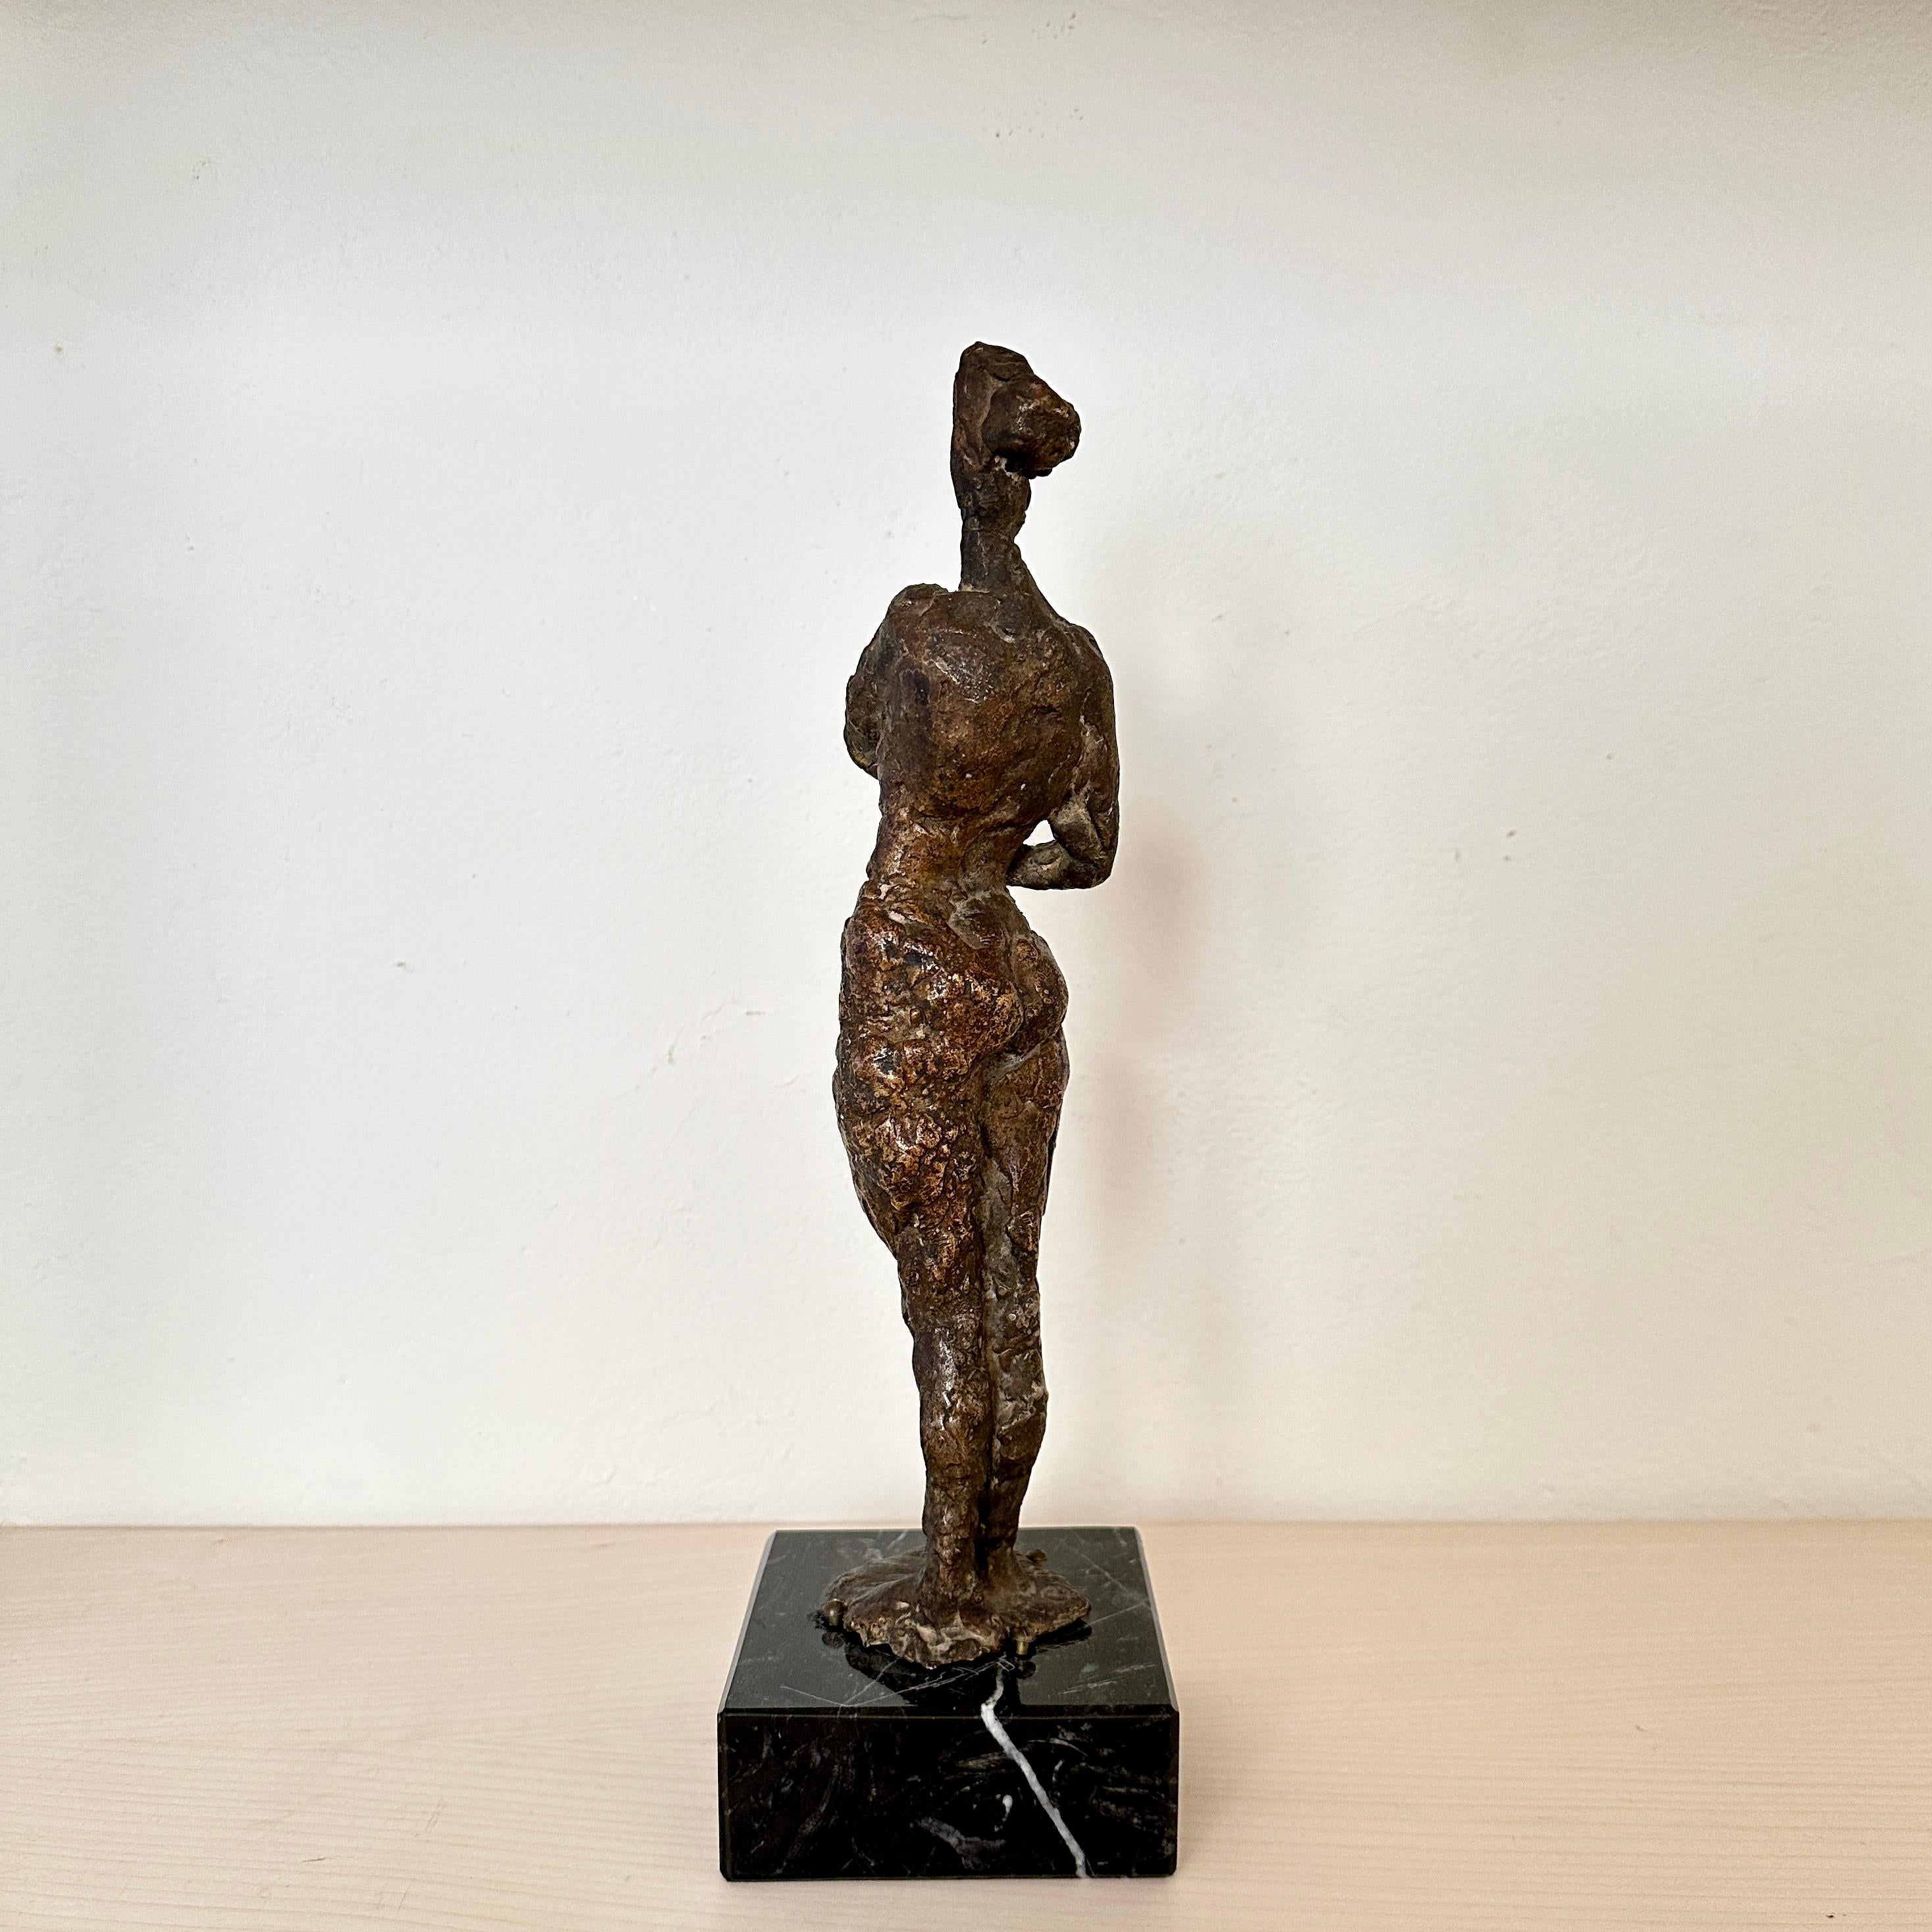 Small Cast Bronze Woman Sculpture by Oskar Bottoli on a Black Marble Stand, 1969 For Sale 4